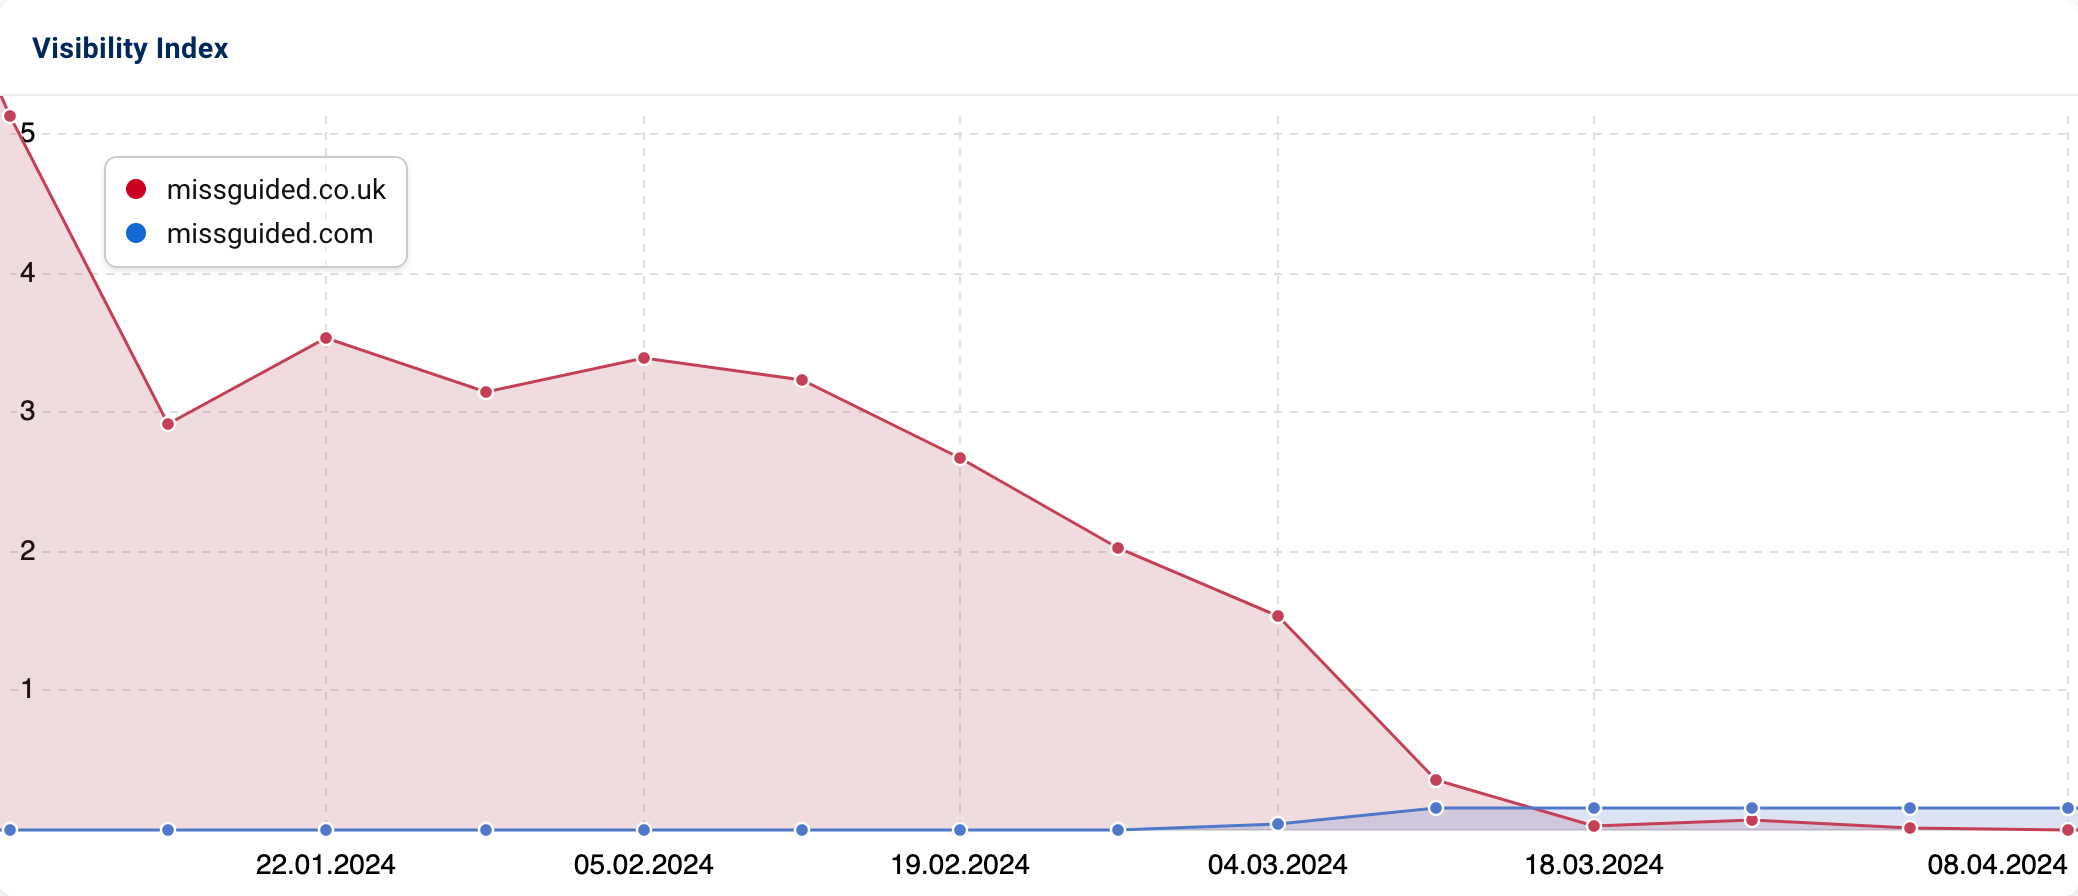 Visibility Index Graph of missguided.co.uk vs. missguided.com.